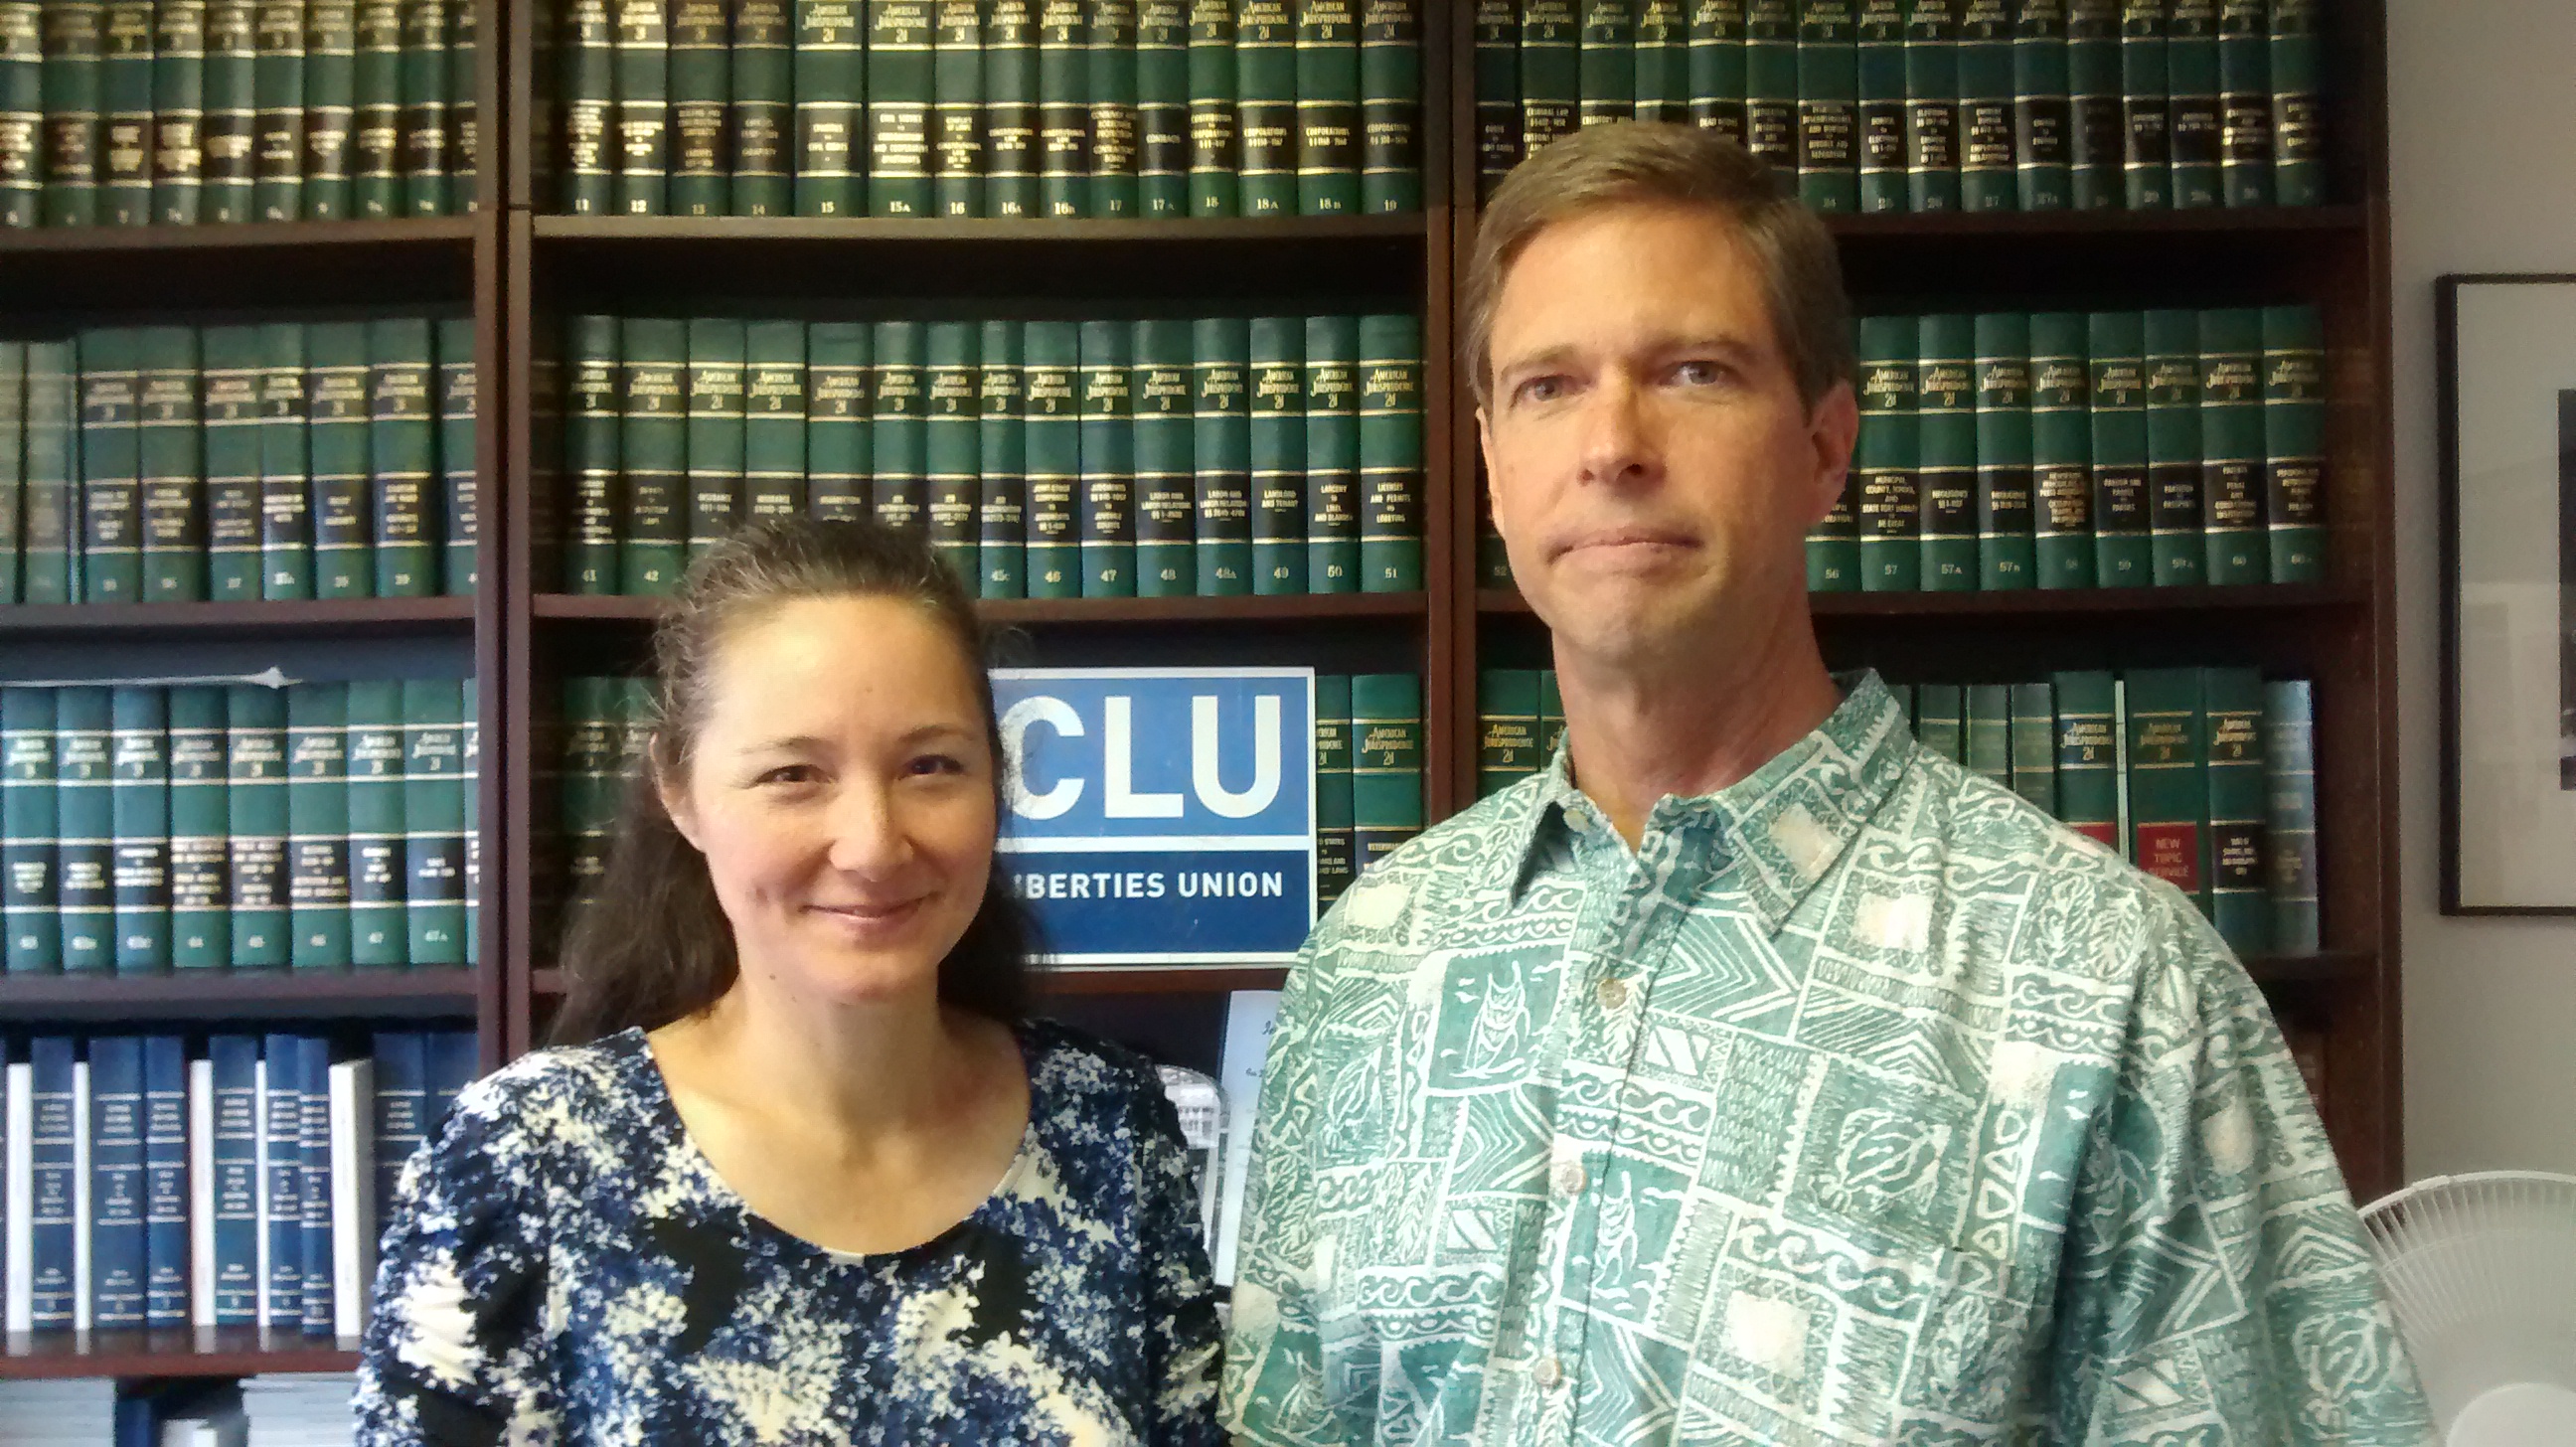 Pastor Strat Goodhue and his wife Doreen. Photo courtesy ACLU.